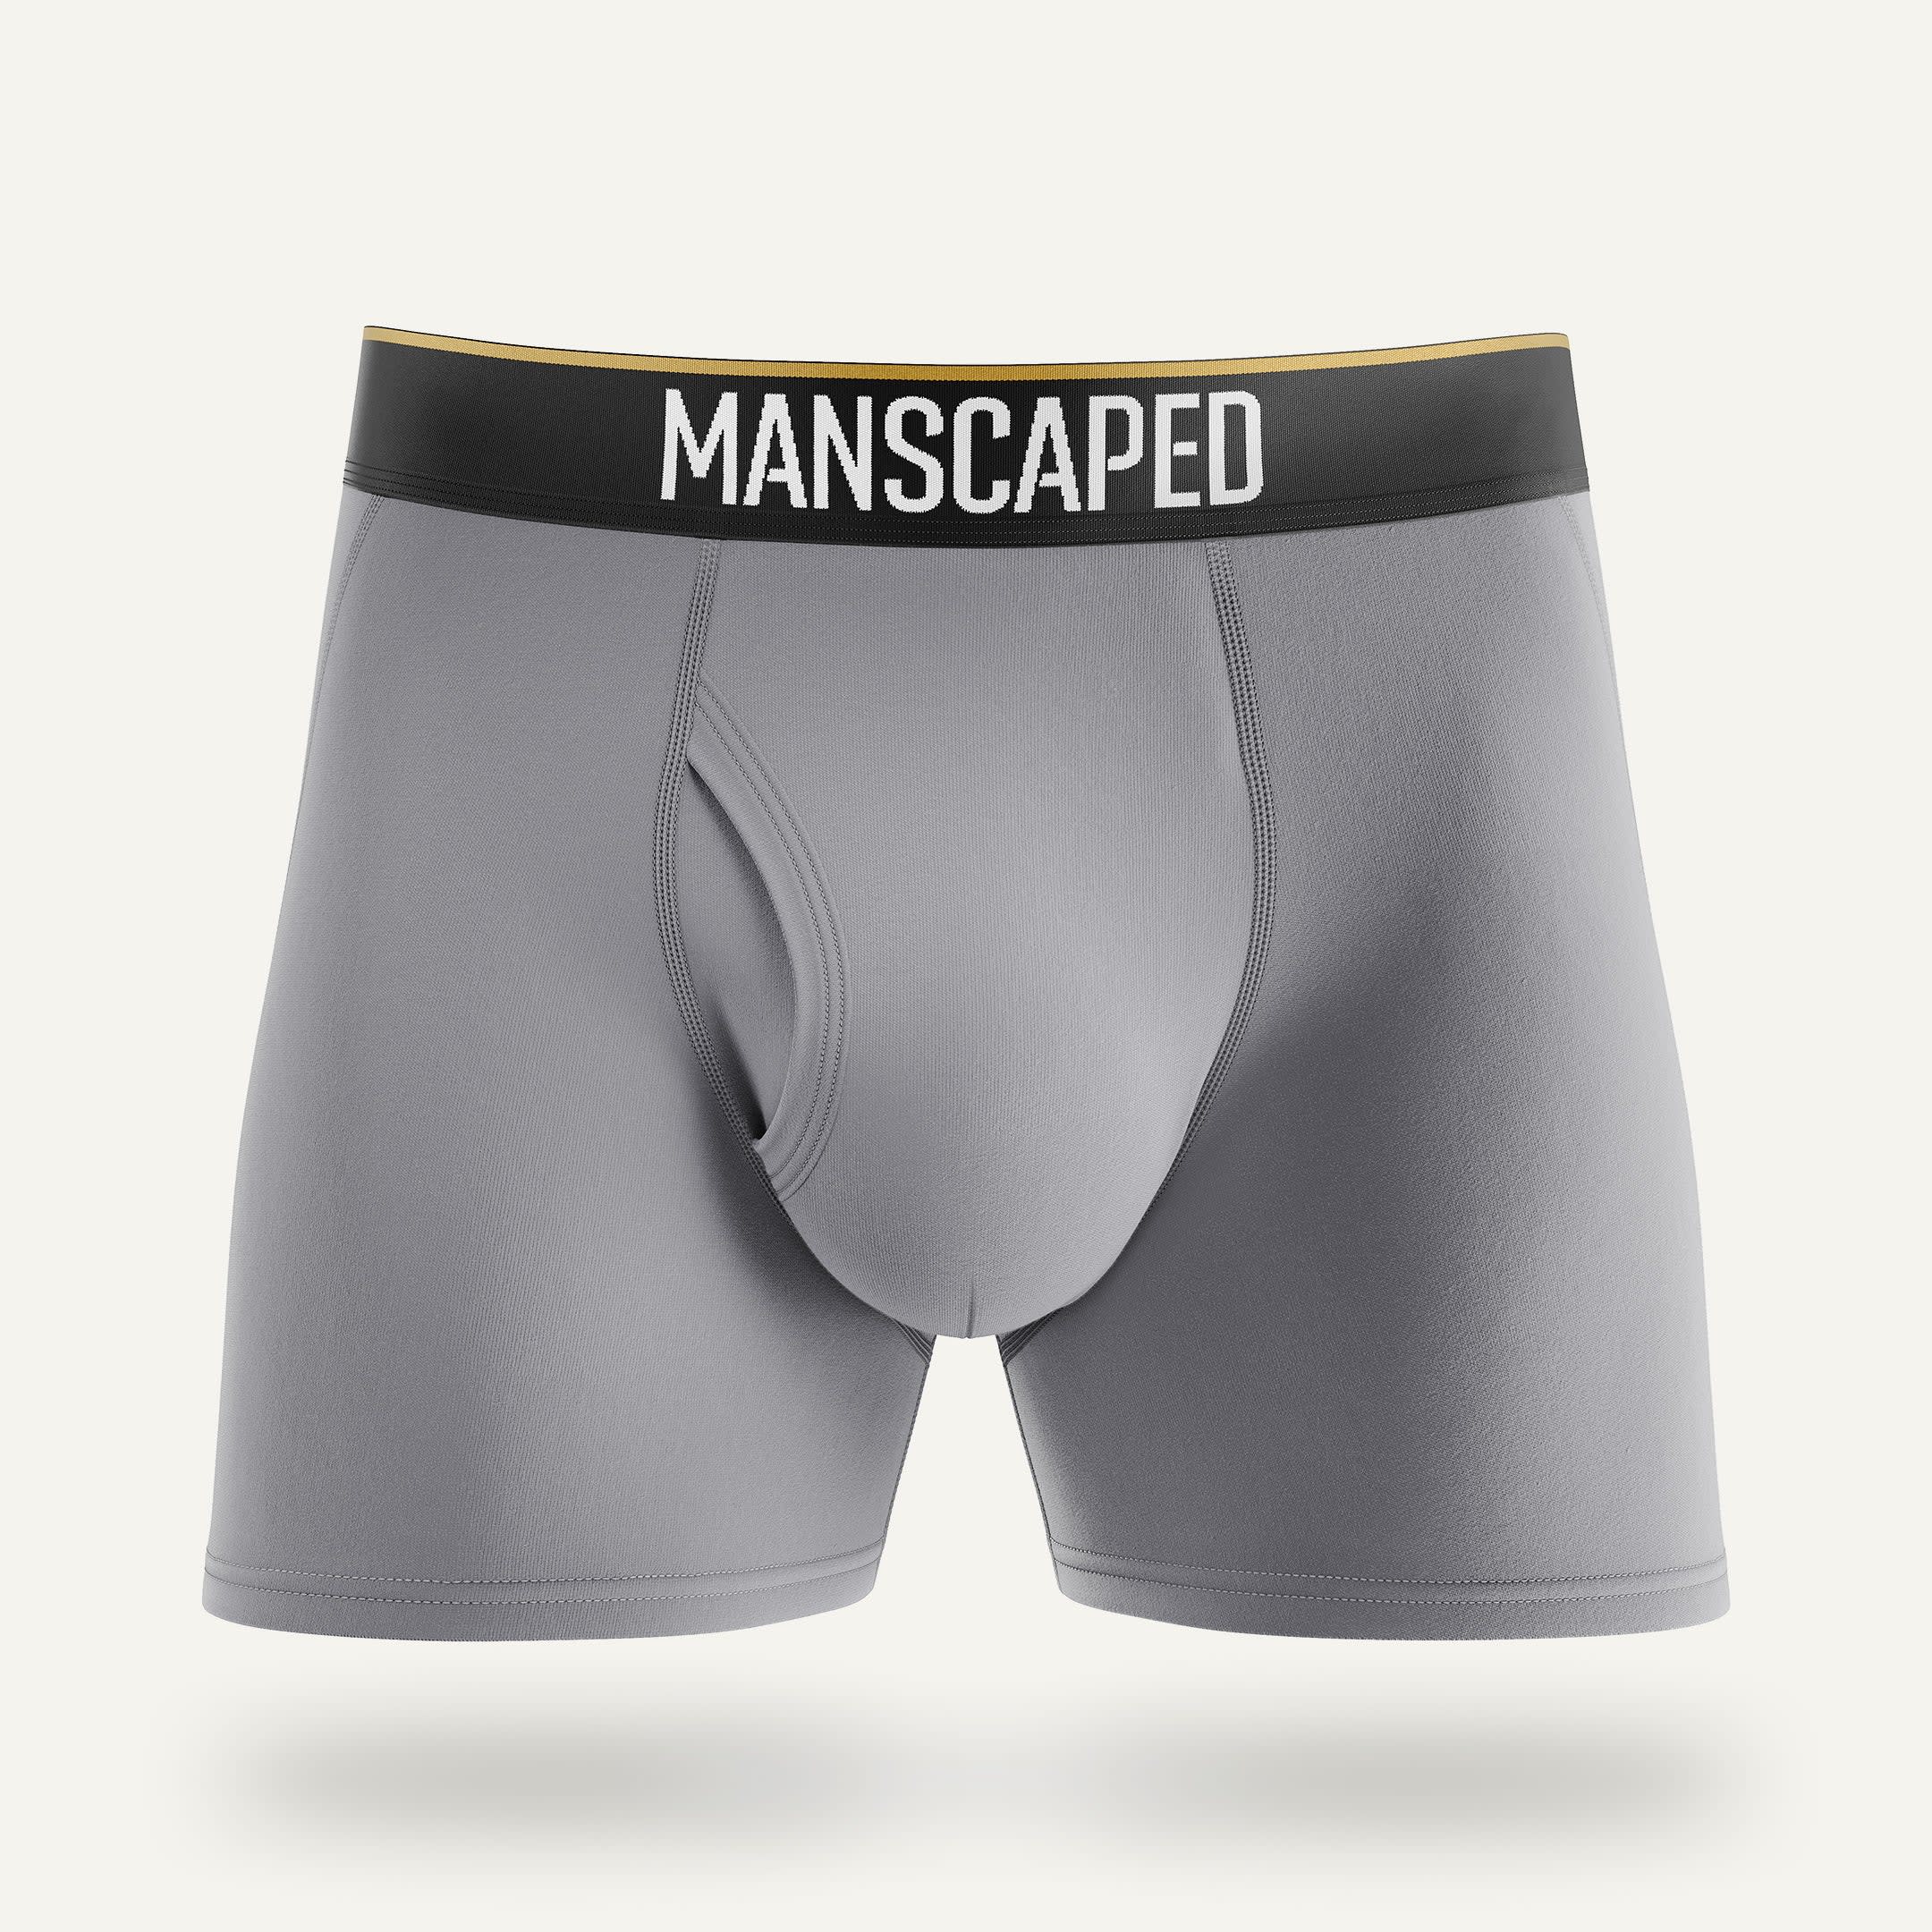  MANSCAPED® Boxers 2.0 Men's Premium Anti-Chafe Athletic  Performance Boxer Briefs, Ultra Soft and Tagless with The Jewel Pouch™  (Medium) Gold Nugget : Clothing, Shoes & Jewelry